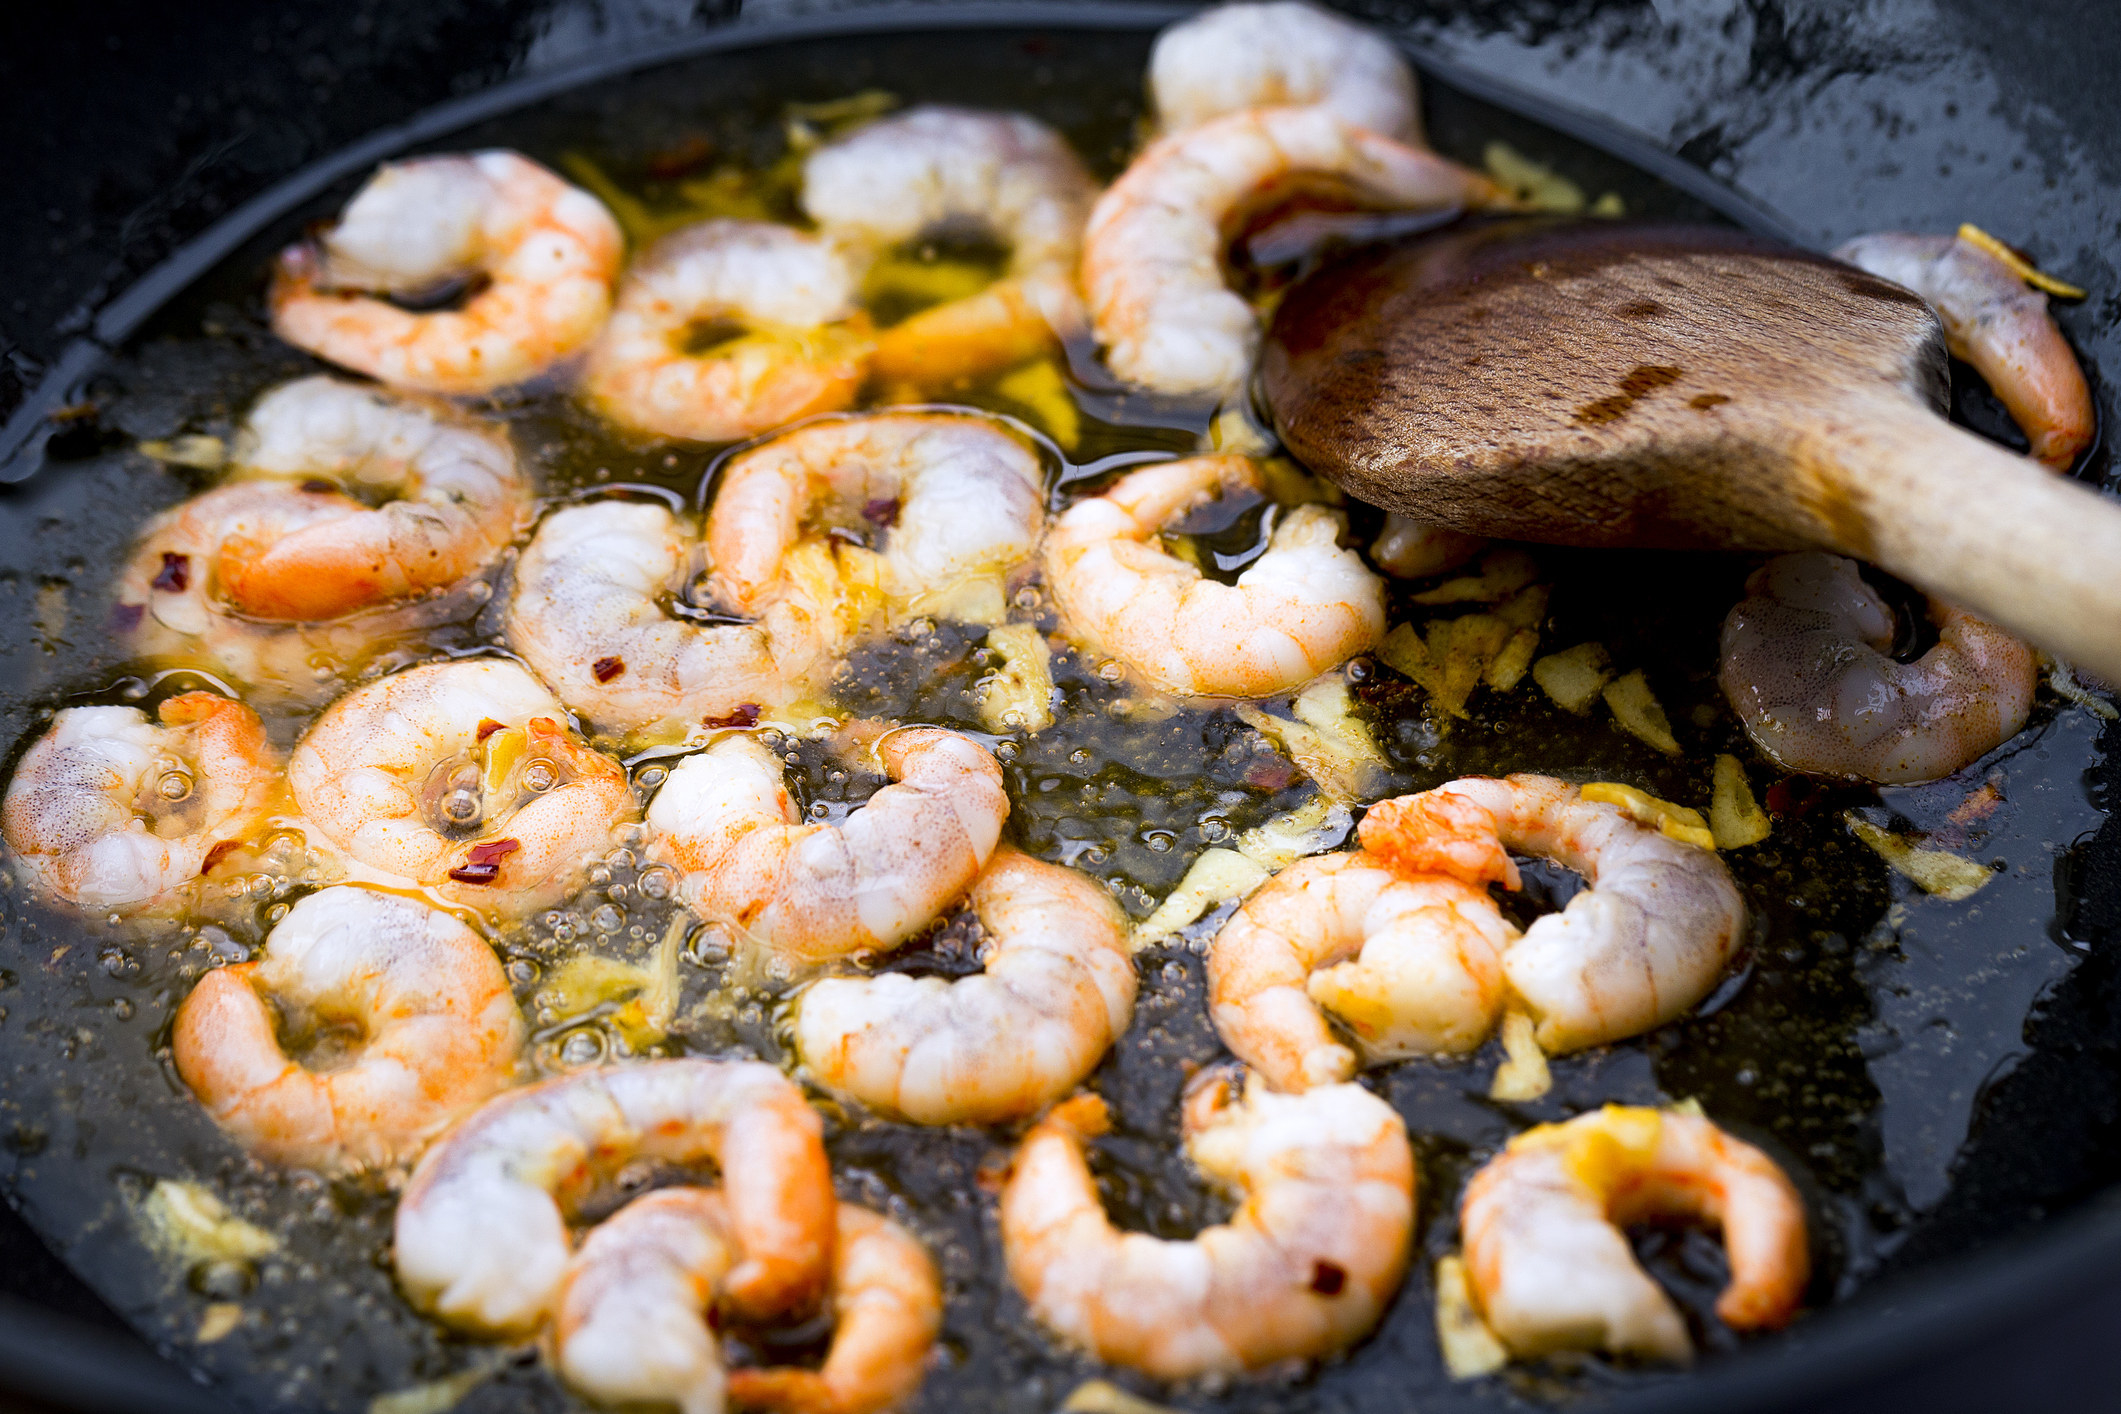 Shrimp with sizzling garlic in a skillet.